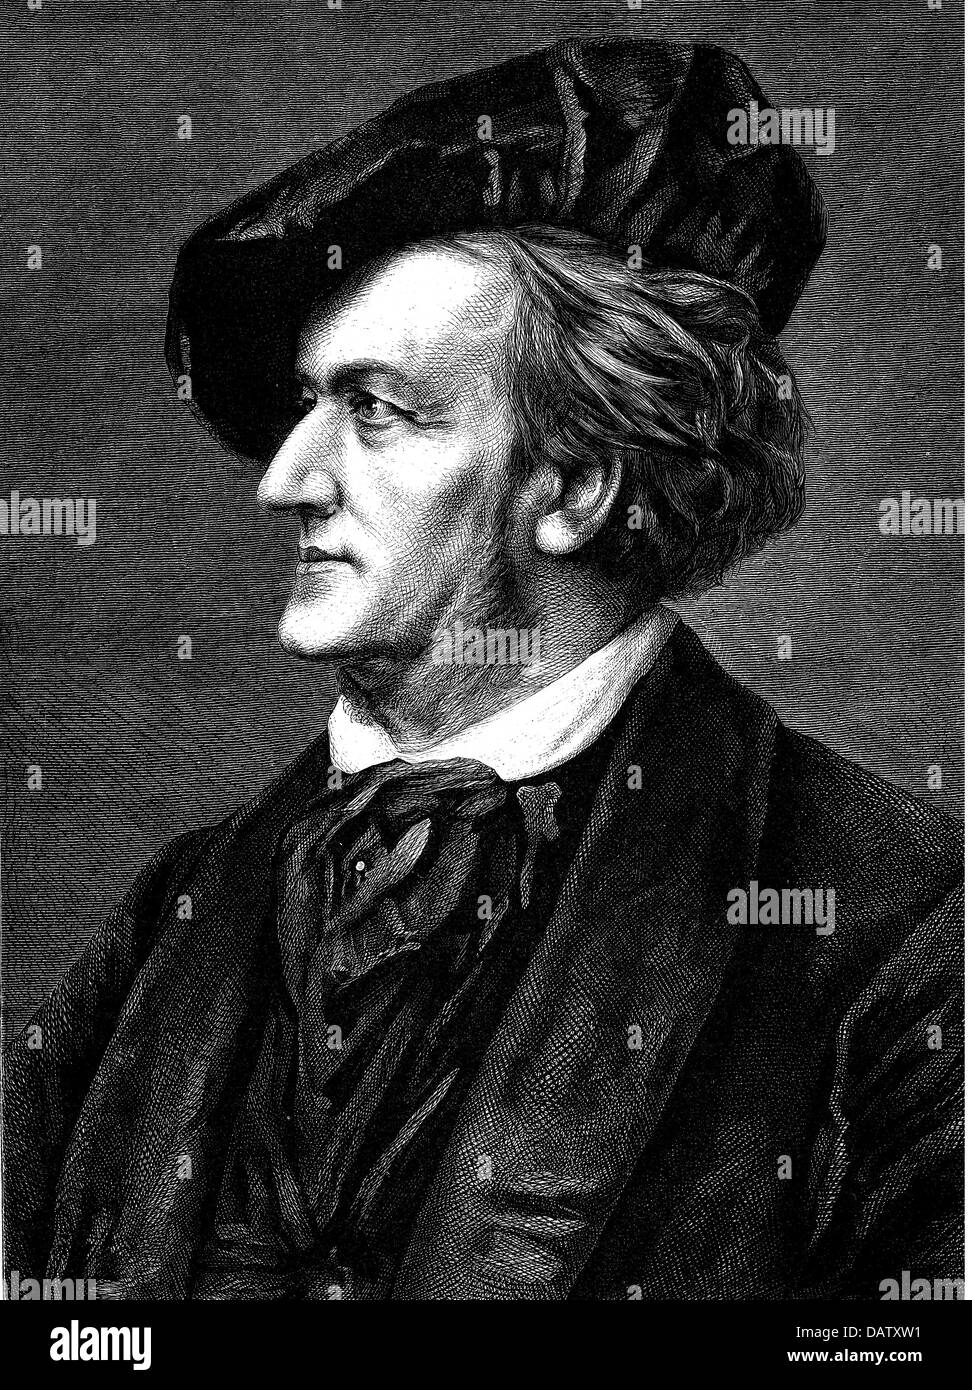 Wagner, Richard, 22.5.1813 - 13.2.1883, German composer, portrait, after photograph of the painting by Franz von Lenbach (1836 - , Stock Photo